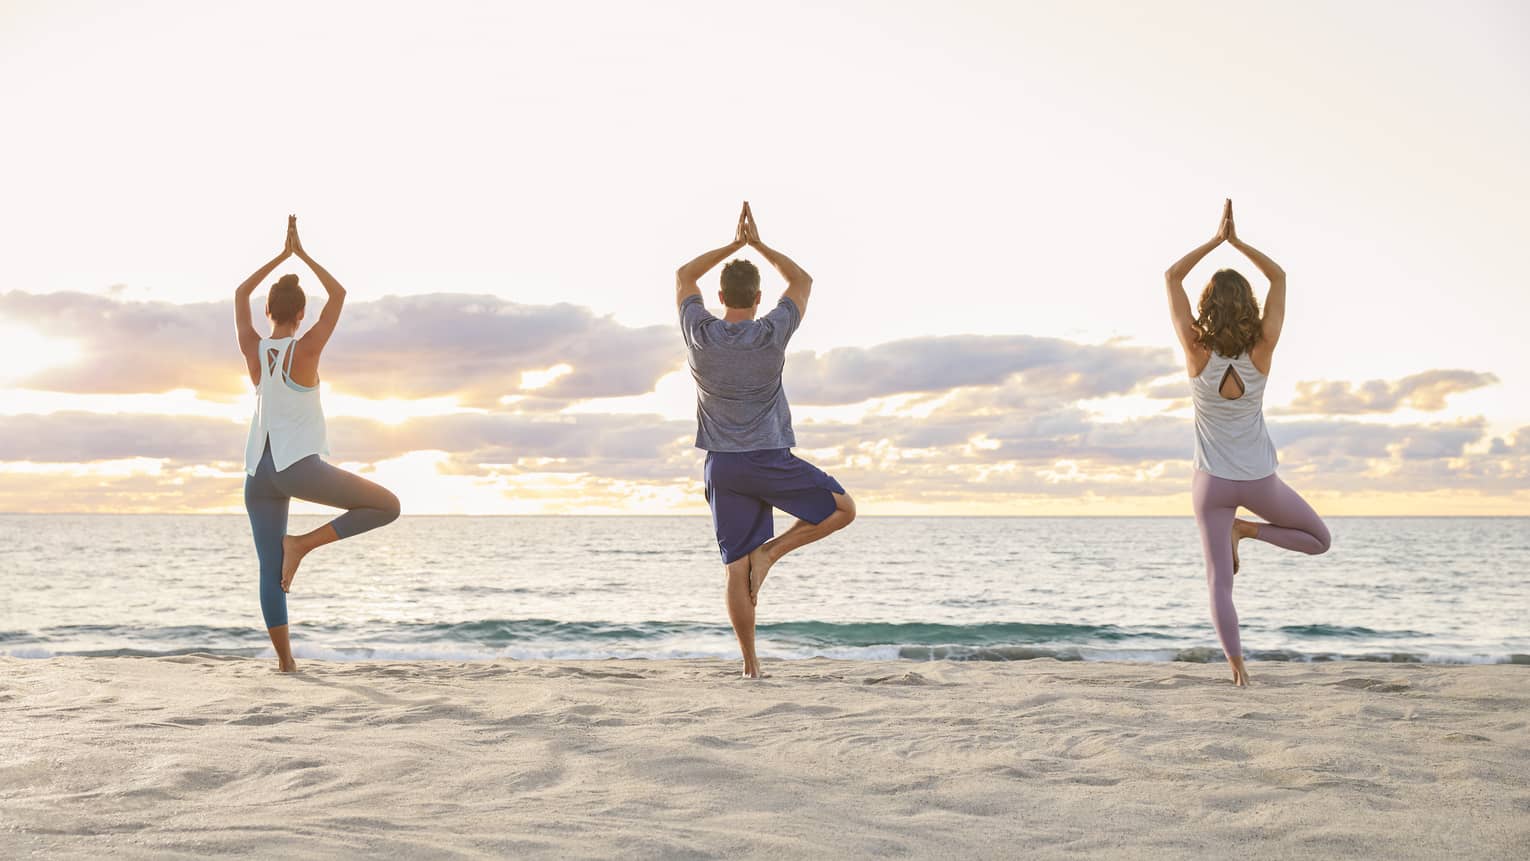 Backs of three people standing in yoga pose on sand beach at sunrise